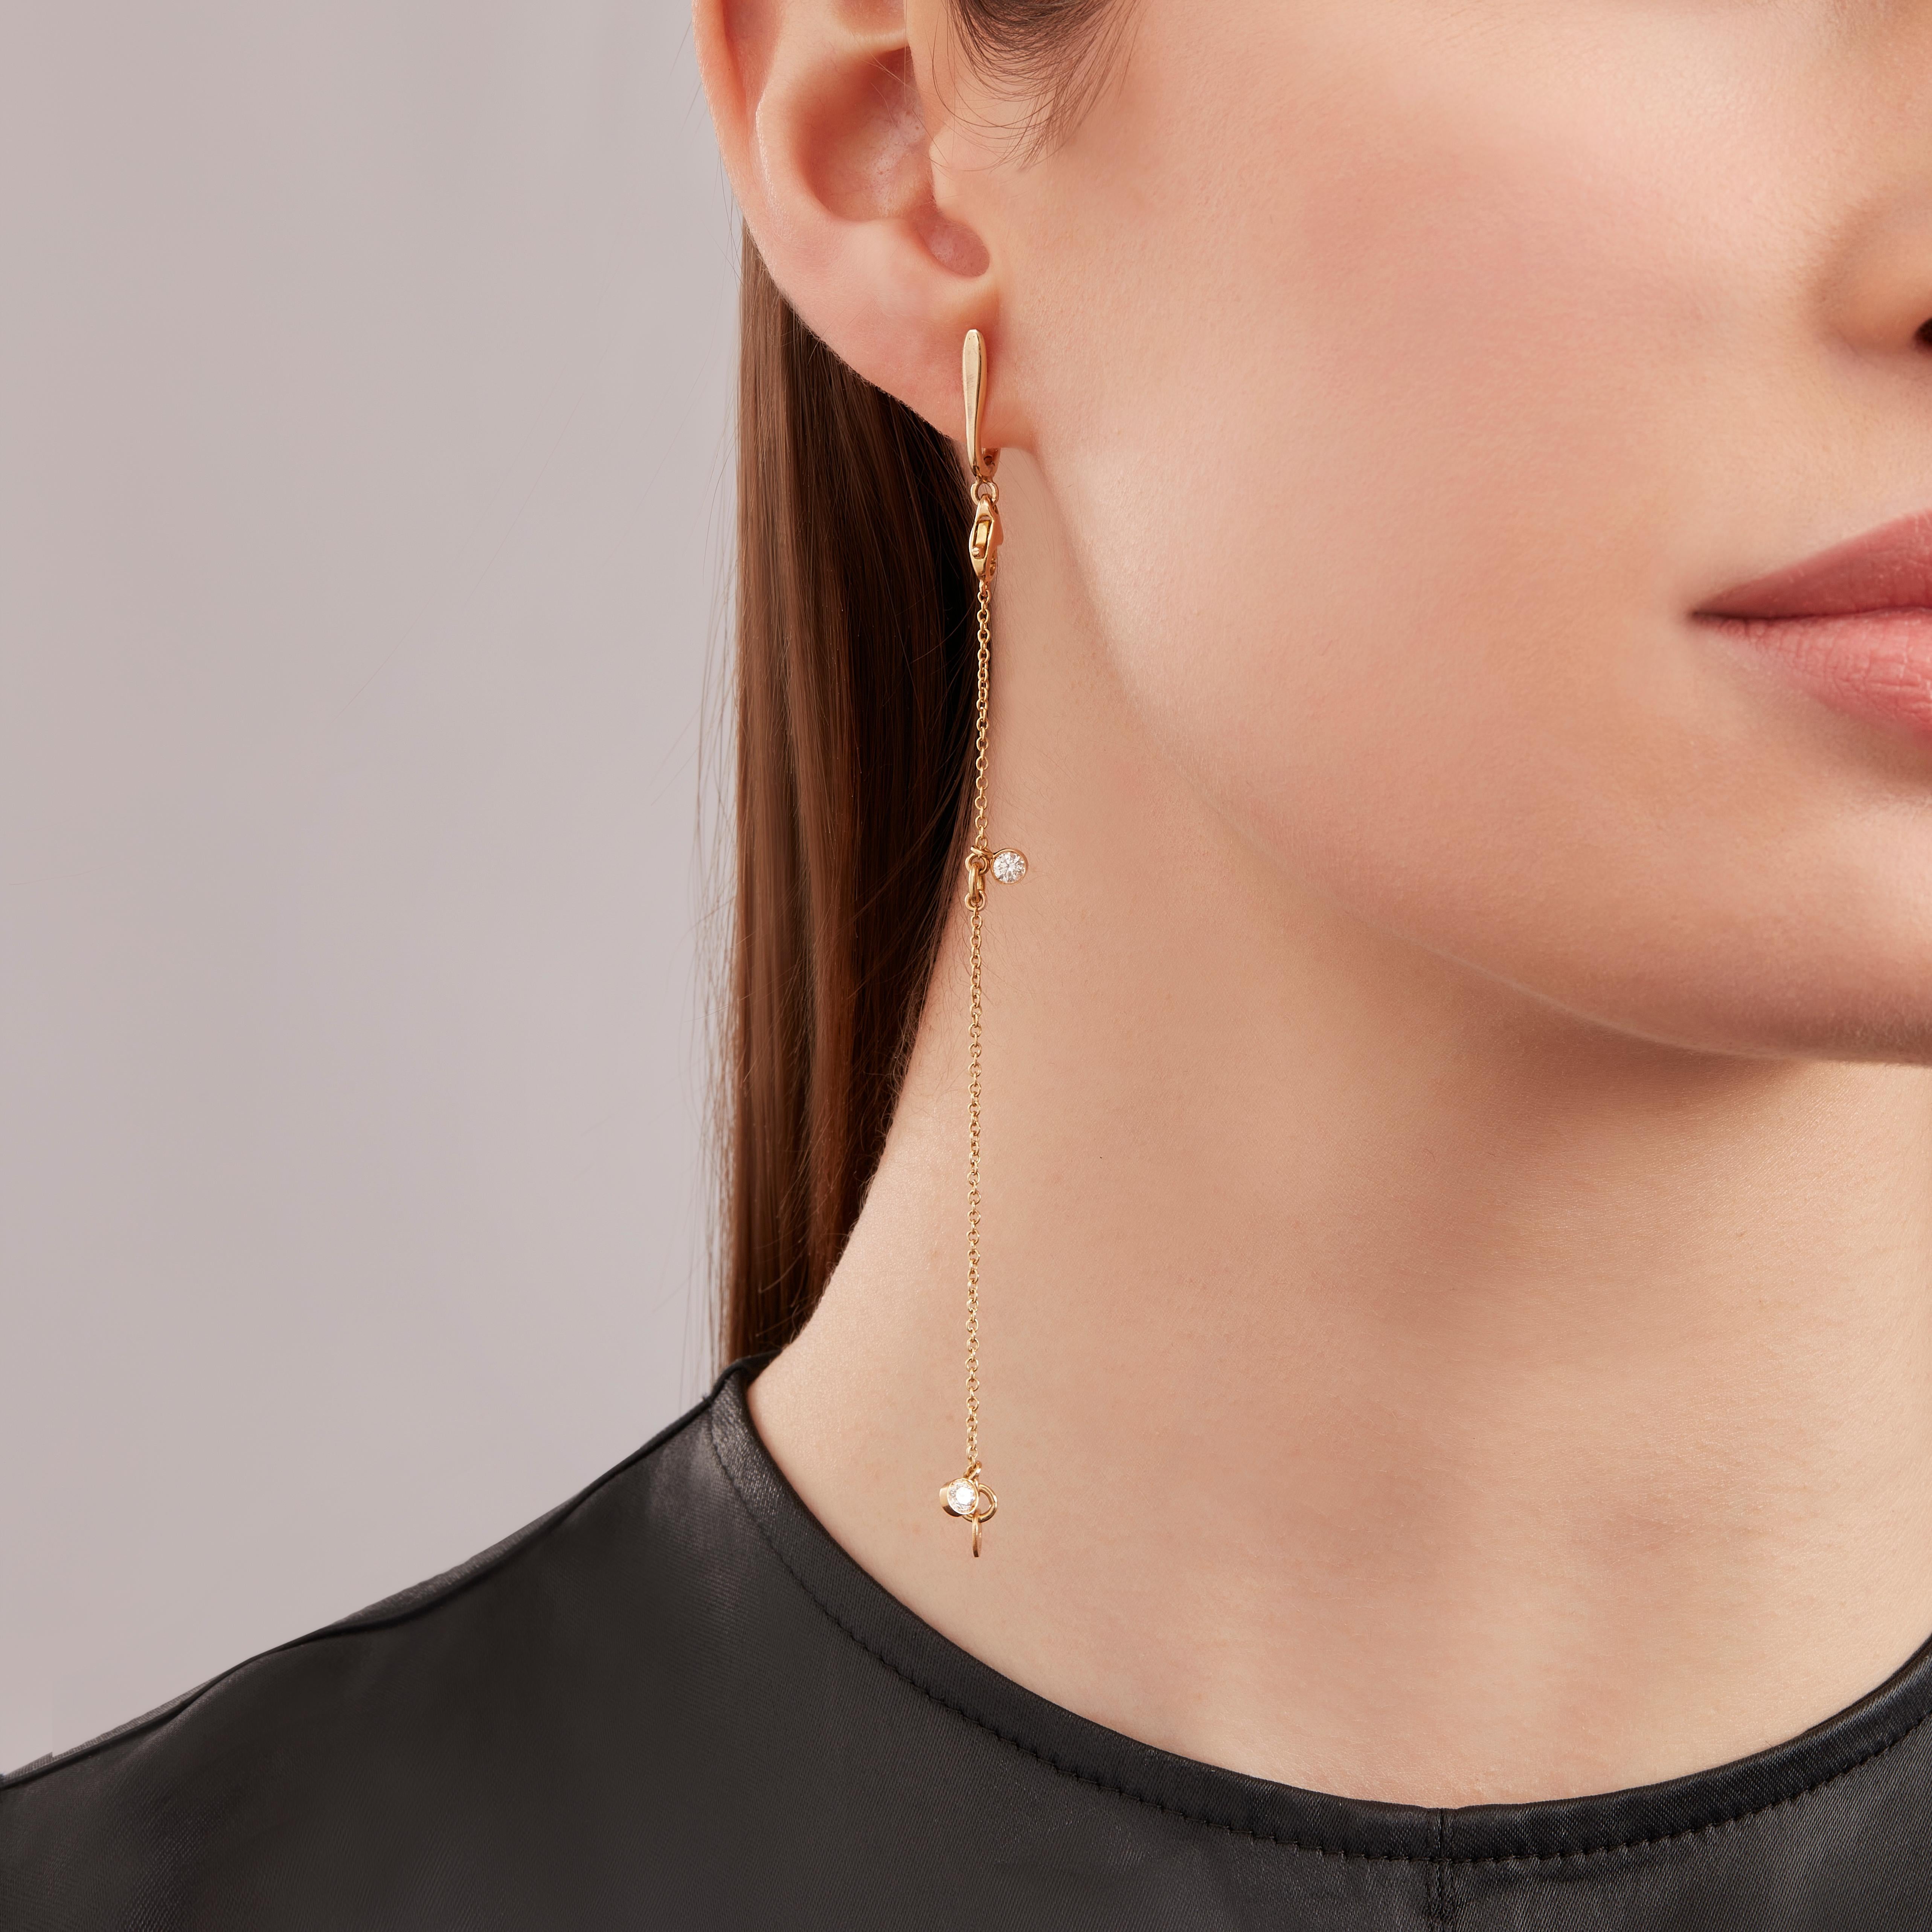 Based on a simple mathematical equation, the 30+60 earring is a creative game where a single piece of jewellery results in multiple configurations. The seemingly enigmatic name, 30+60, refers to the 30mm and 60mm segments of gold chain, linked to